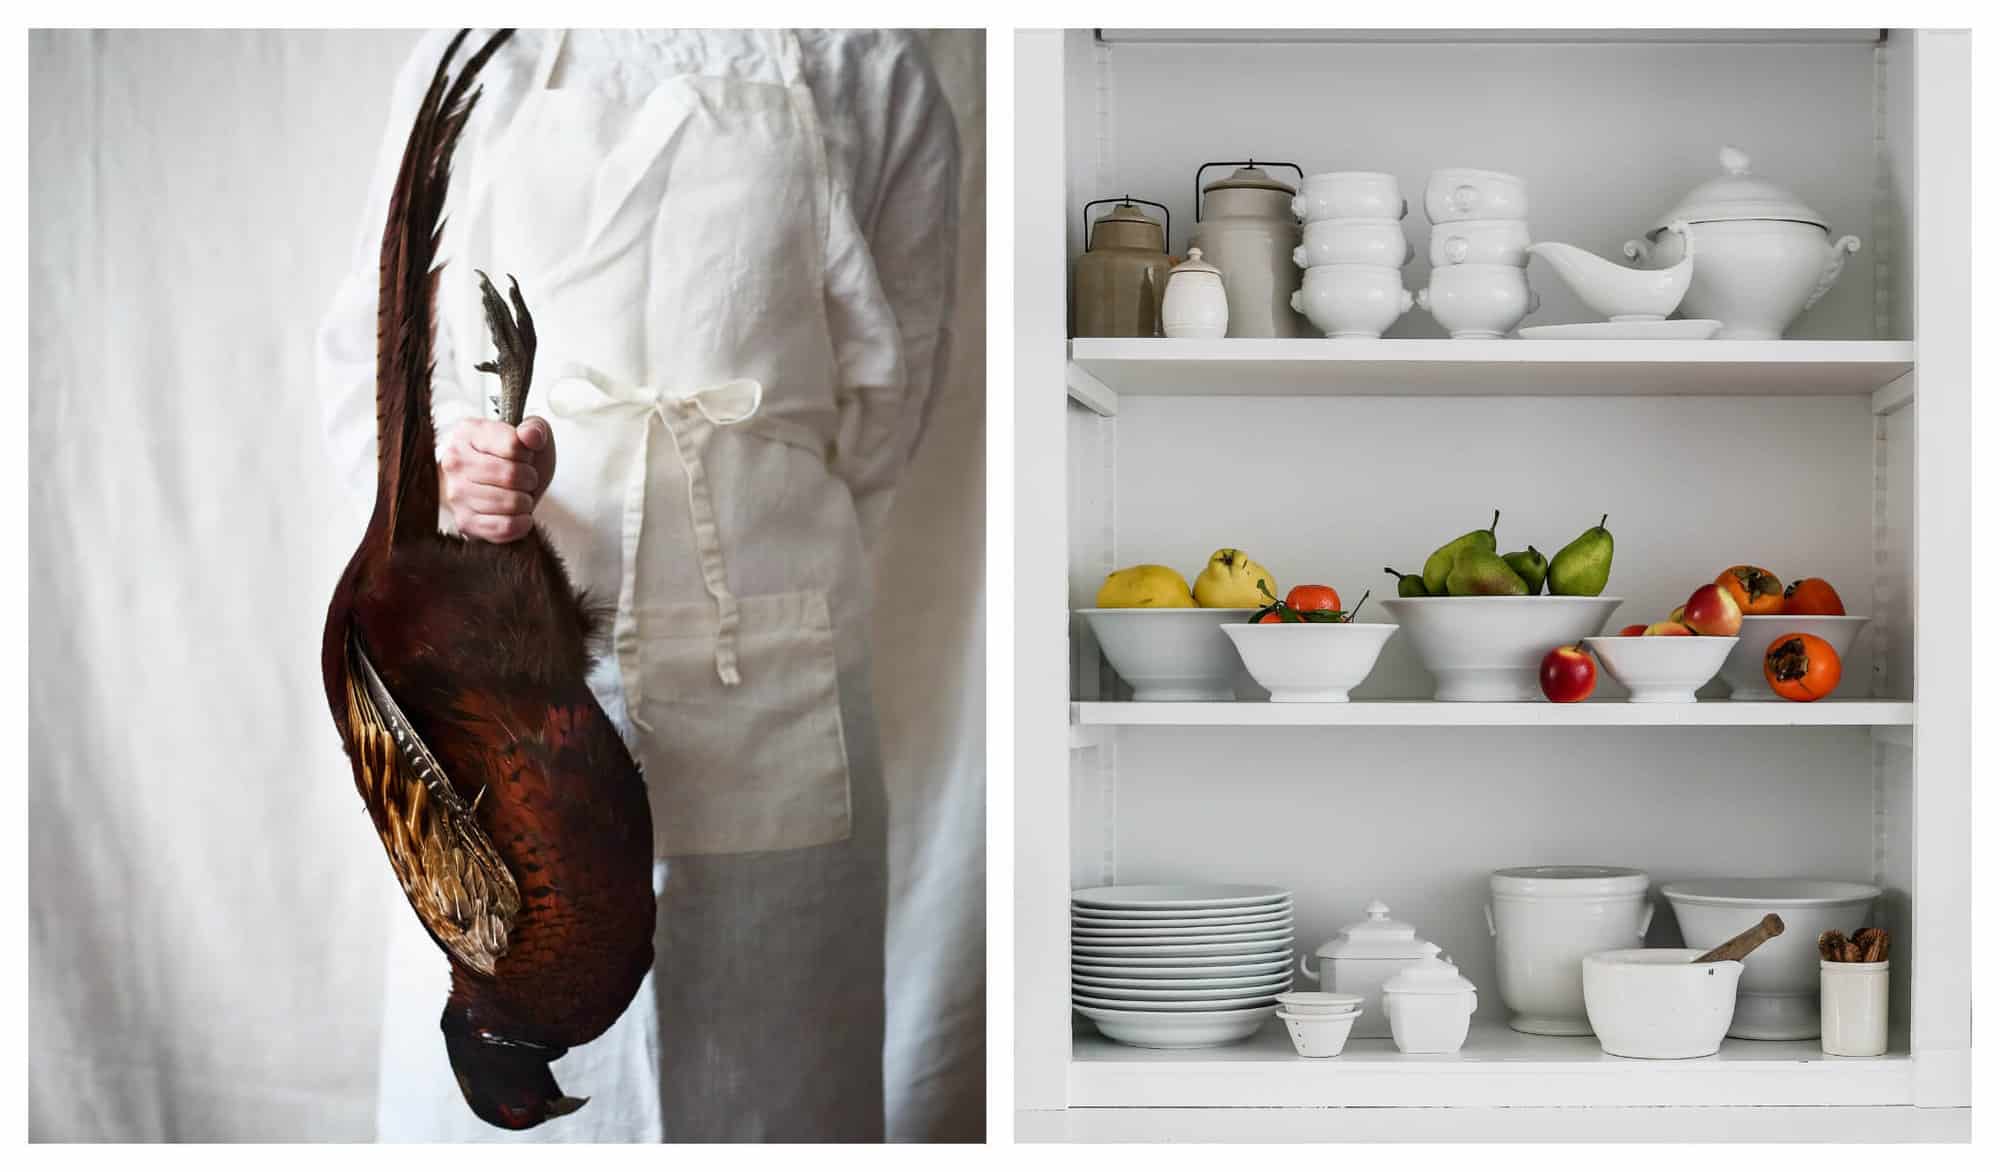 Left: Marjorie Taylor holds a pheasant with one hand. Right: A white cupboard is filled with white bowls filled with fruit, alongside soup bowls, plates, and serving dishes. 